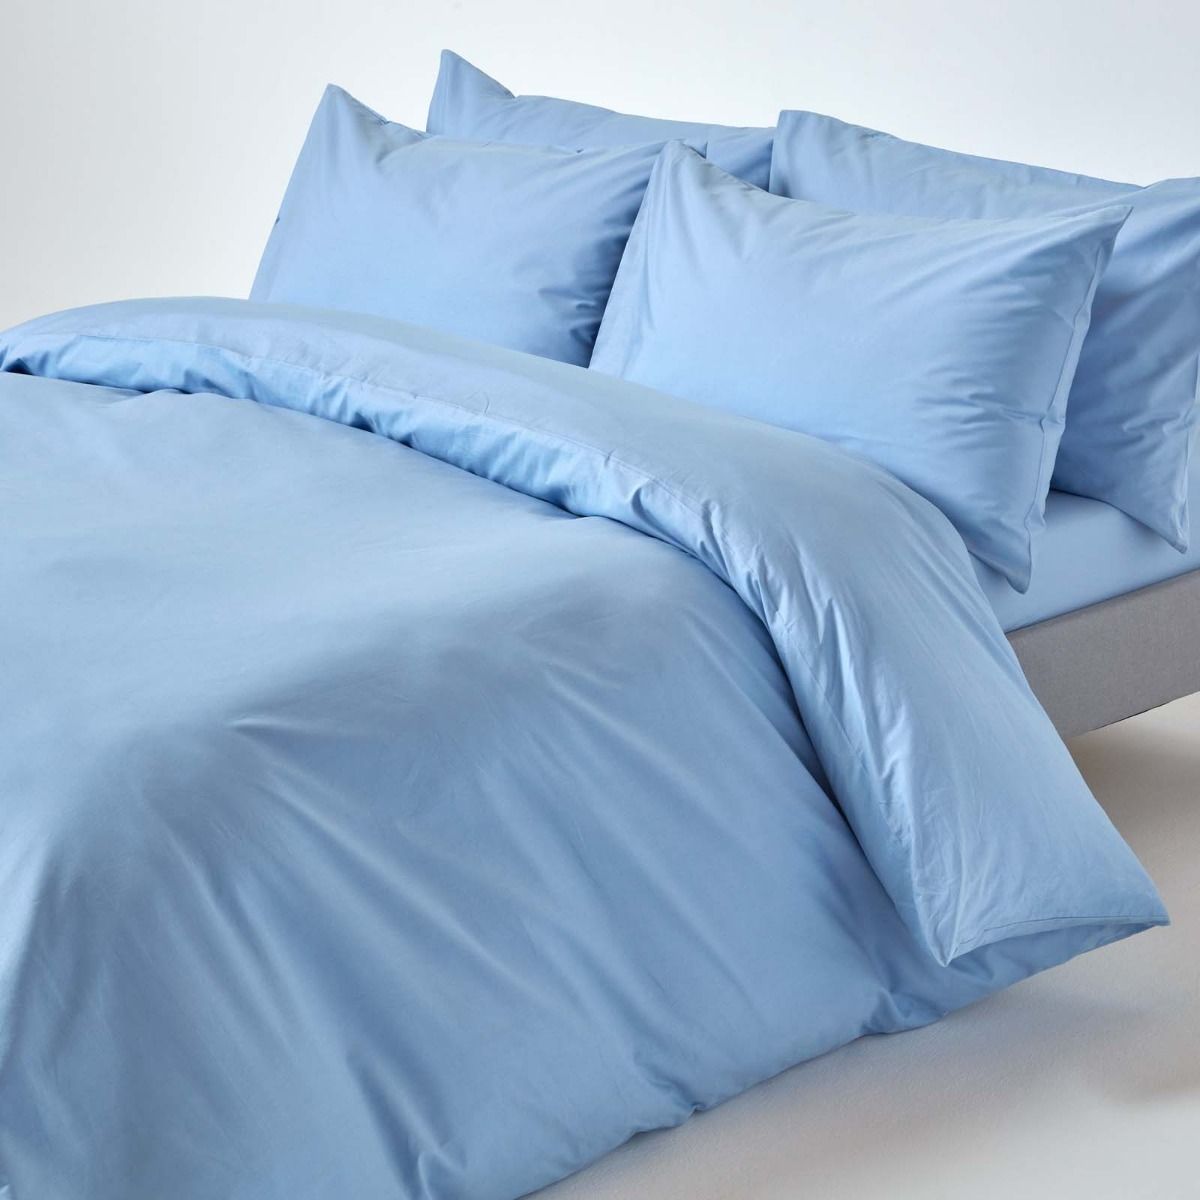 Blue Egyptian Cotton Duvet Cover With, Teal Egyptian Cotton Duvet Cover